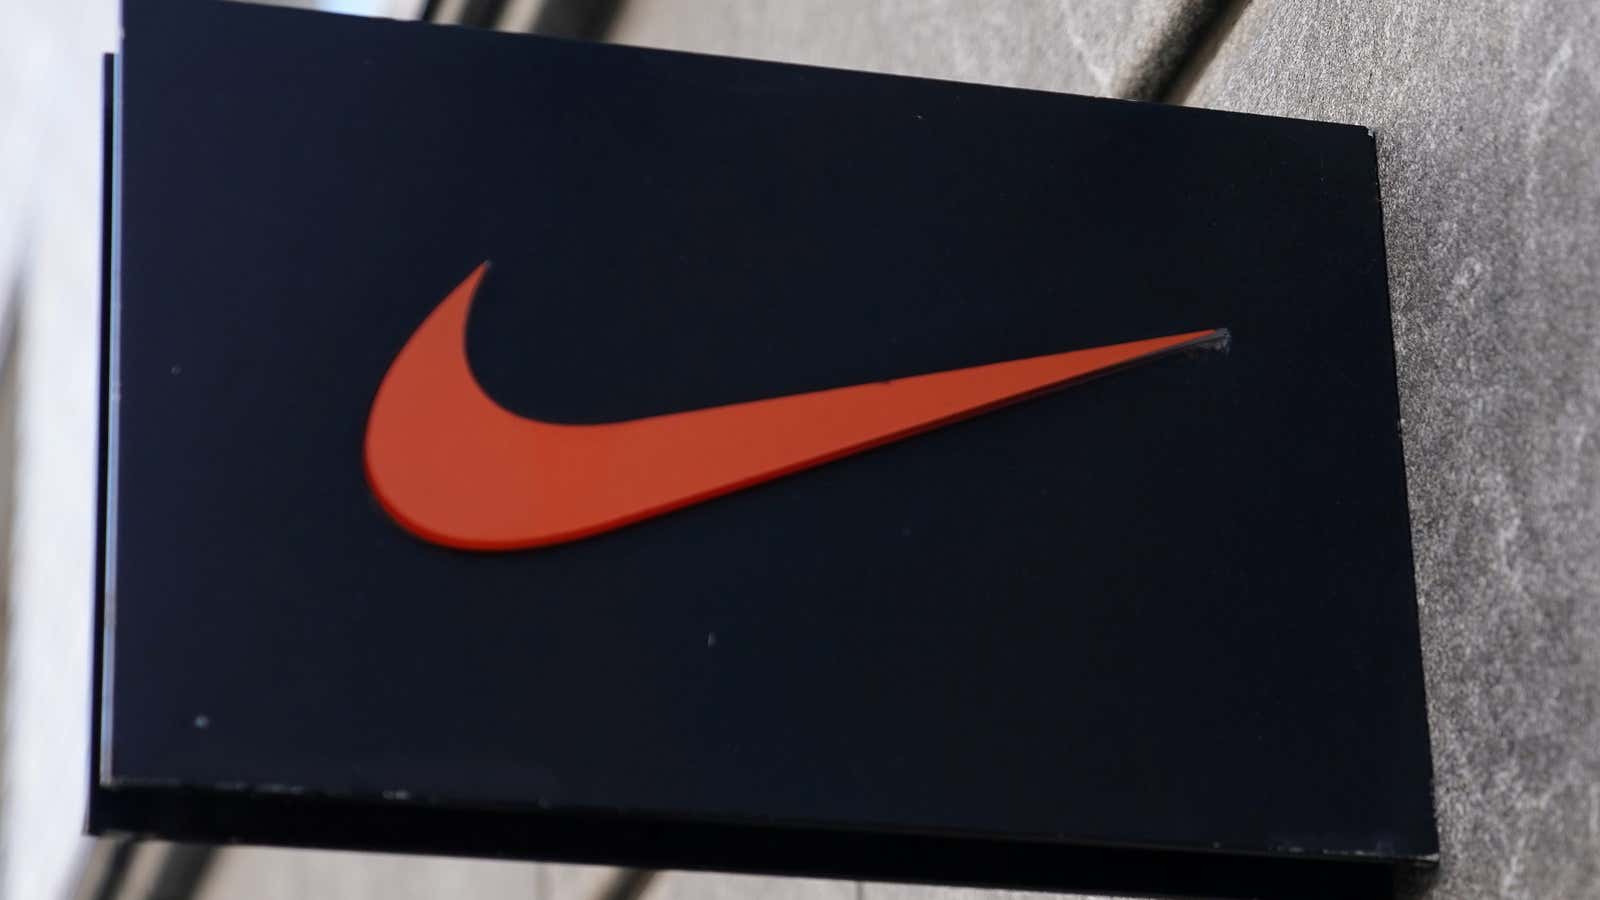 Nike is facing snarls in its supply chain that are slowing imports from its Asian factories and dragging down sales.